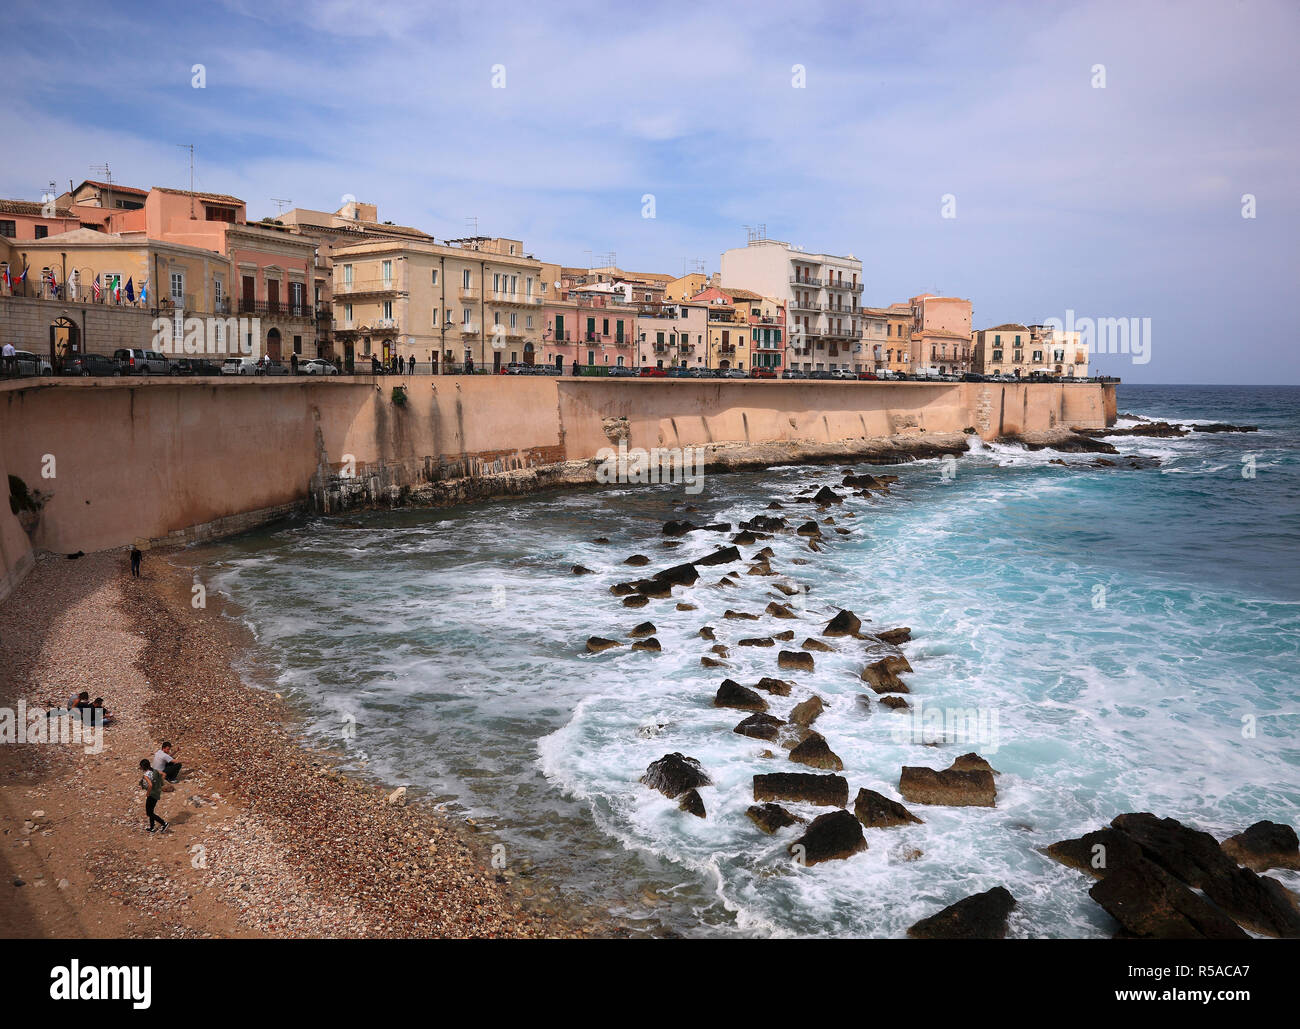 Houses by the sea, Ortygia, historical center of the city Siracusa, Syracuse, Sicily, Italy Stock Photo